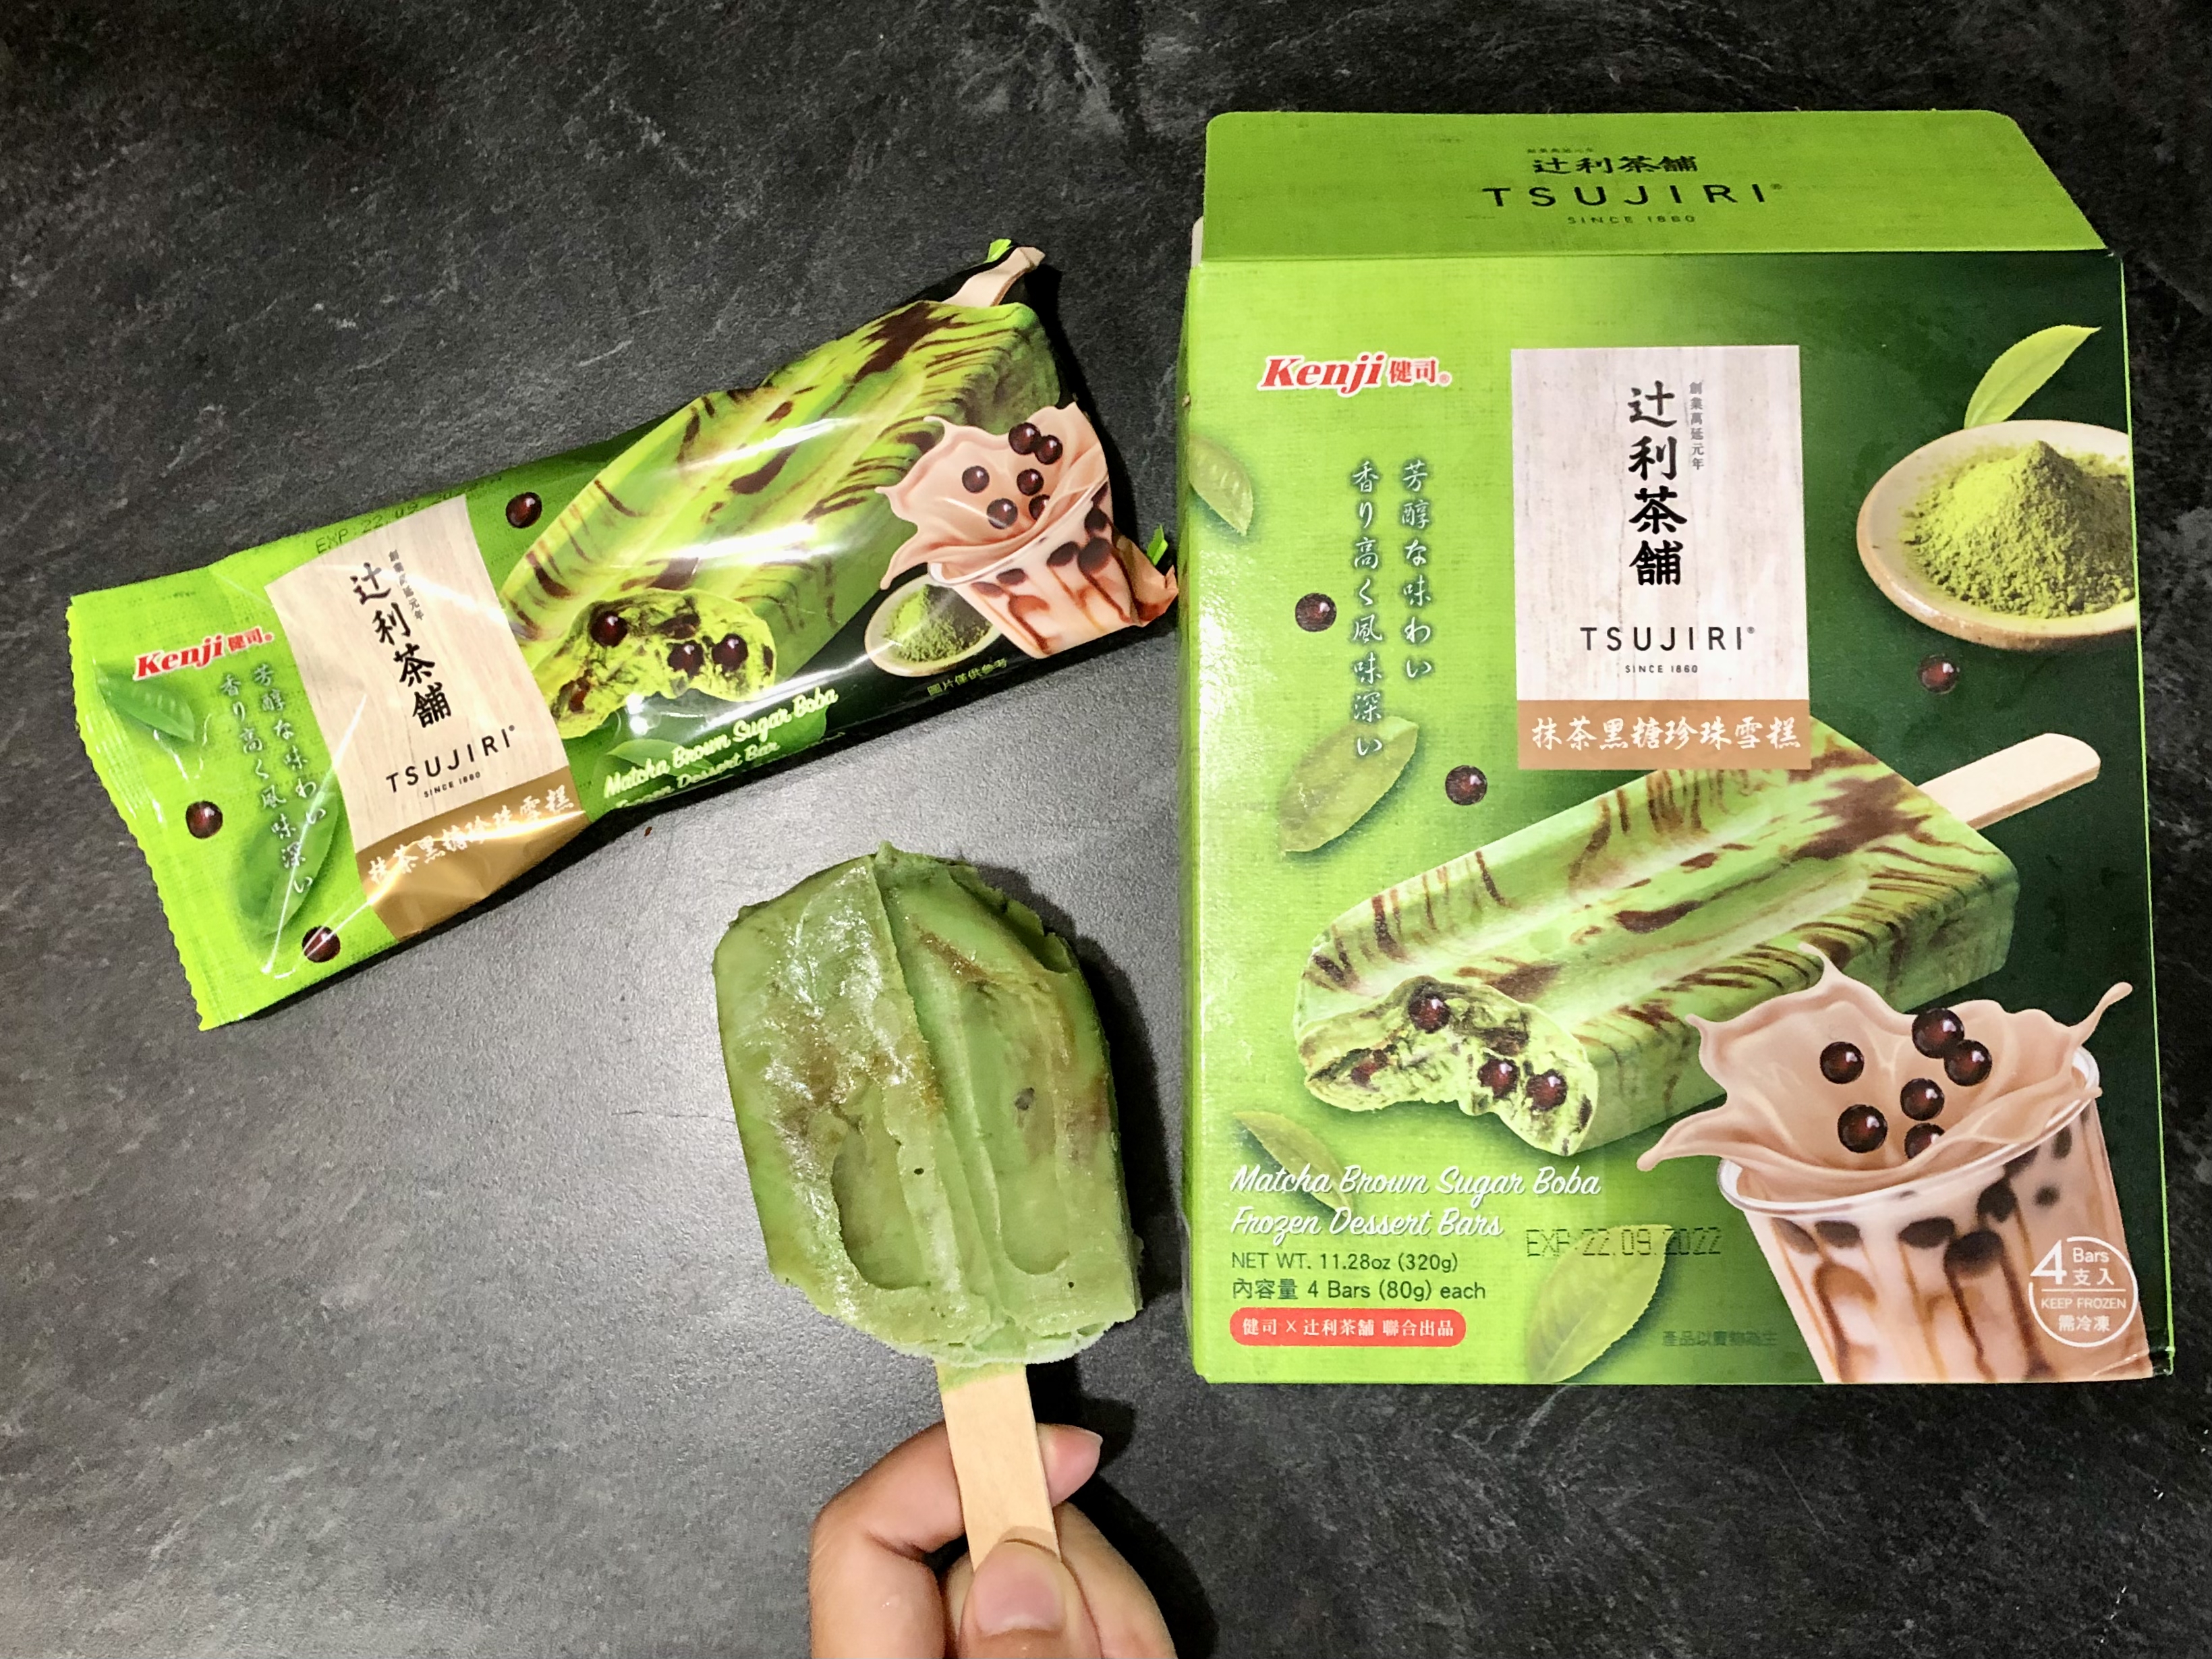 On a black counter, there is a green icepop with the green plastic packaging and matching paper box. Photo by Xiaohui Zhang.